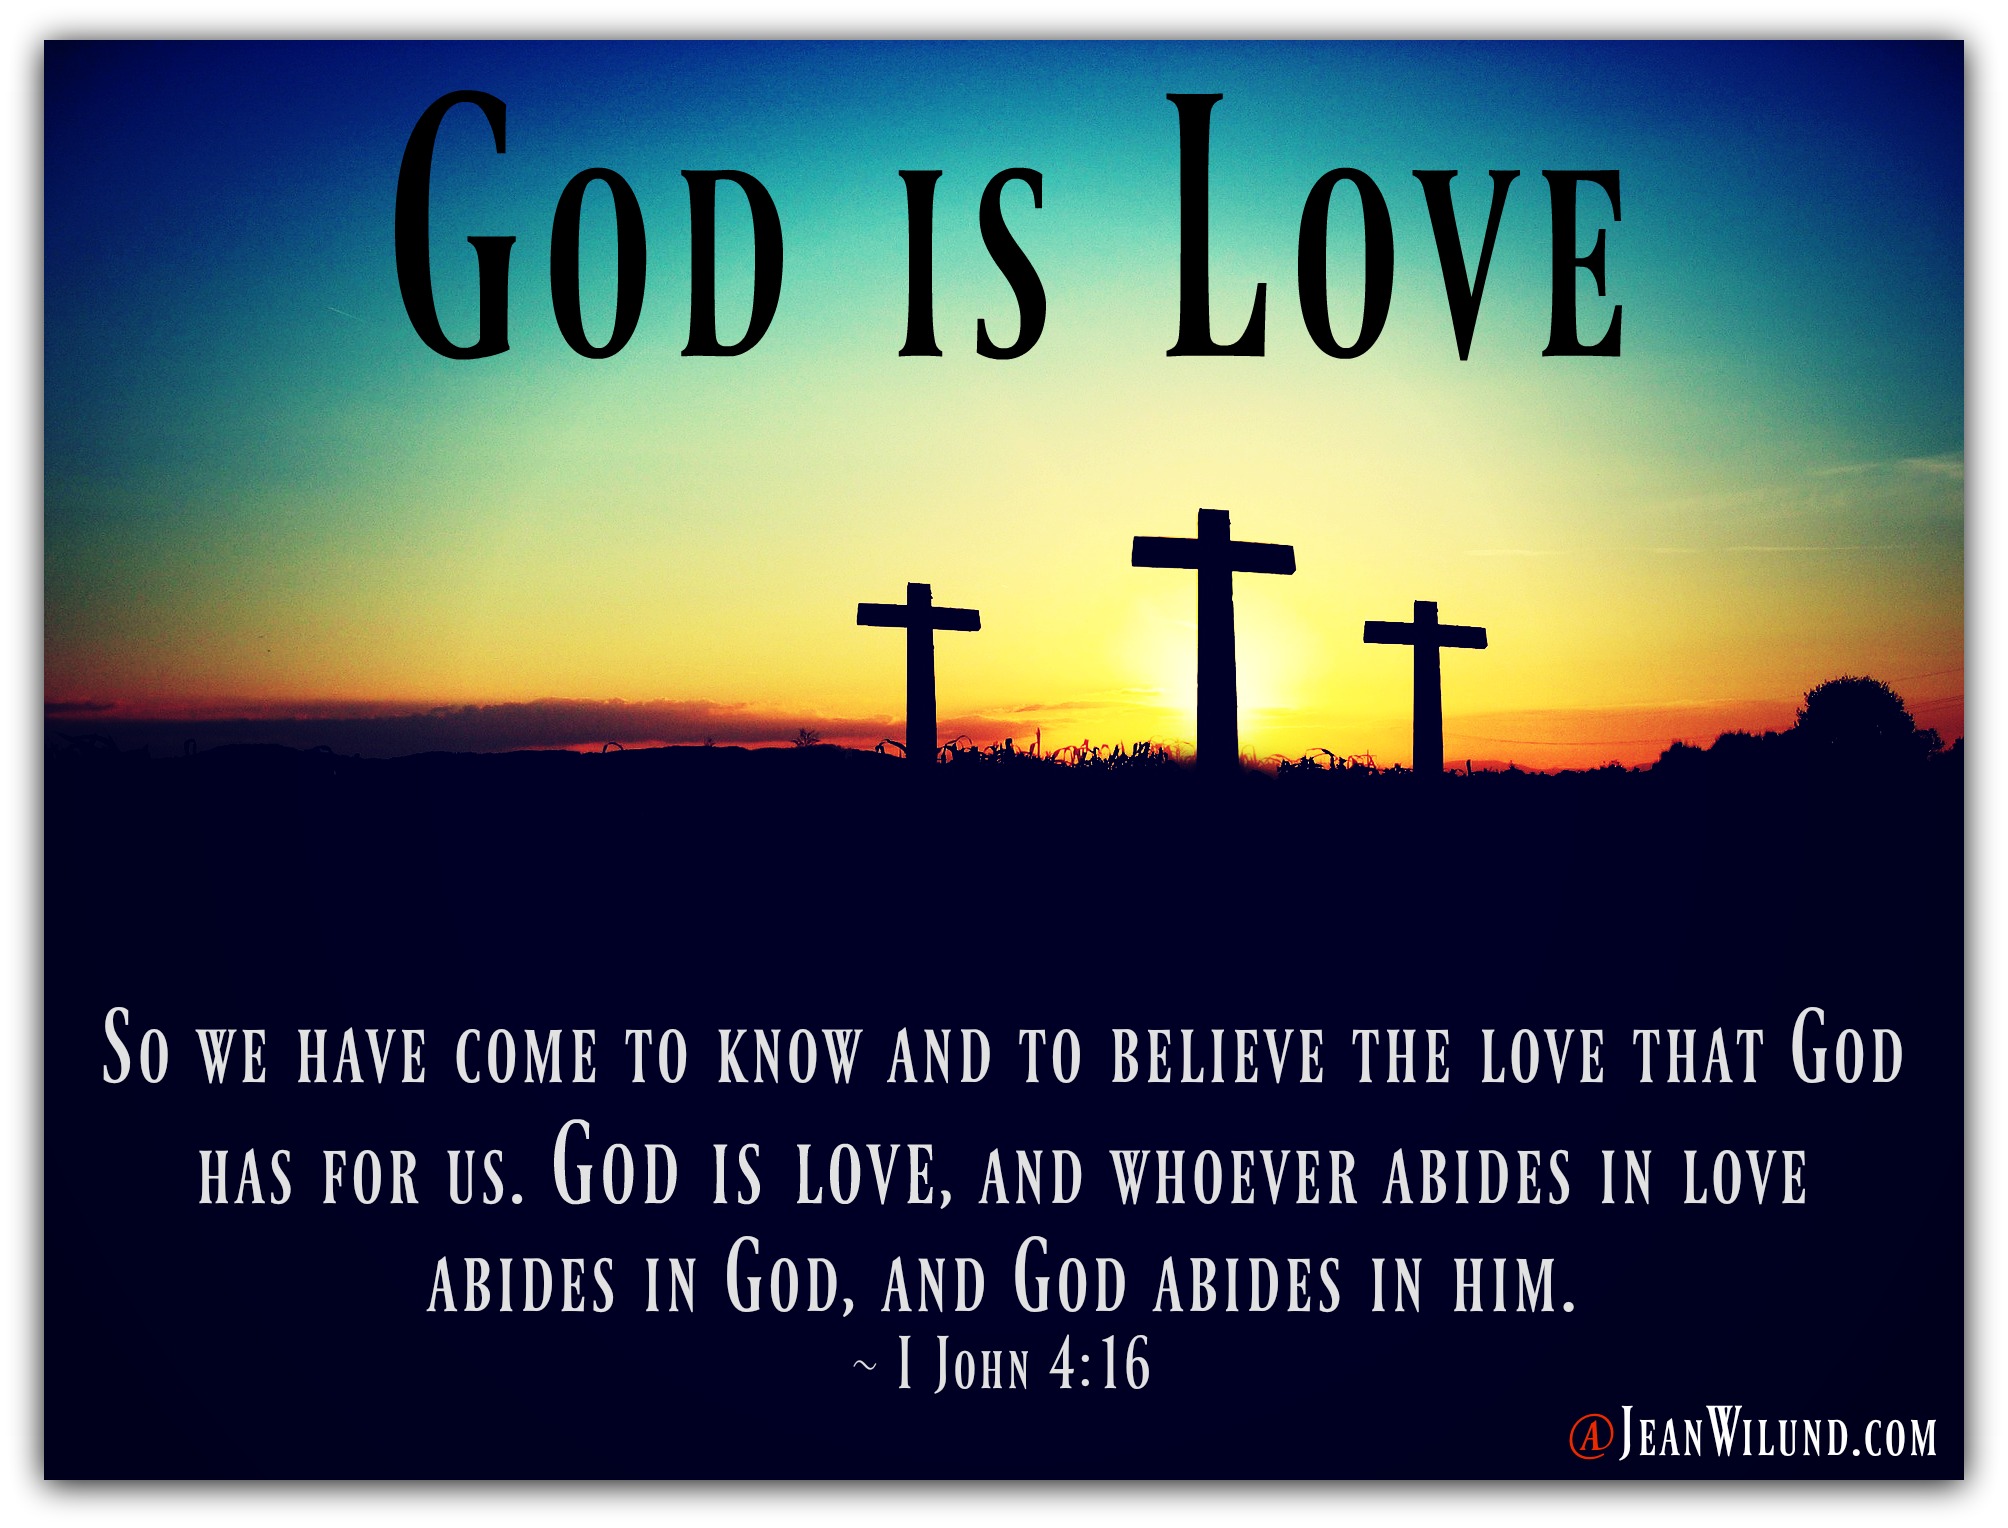 God is Love (From The Never-Ending, Ever-Growing List of the Character Traits of God) via www.JeanWilund.com